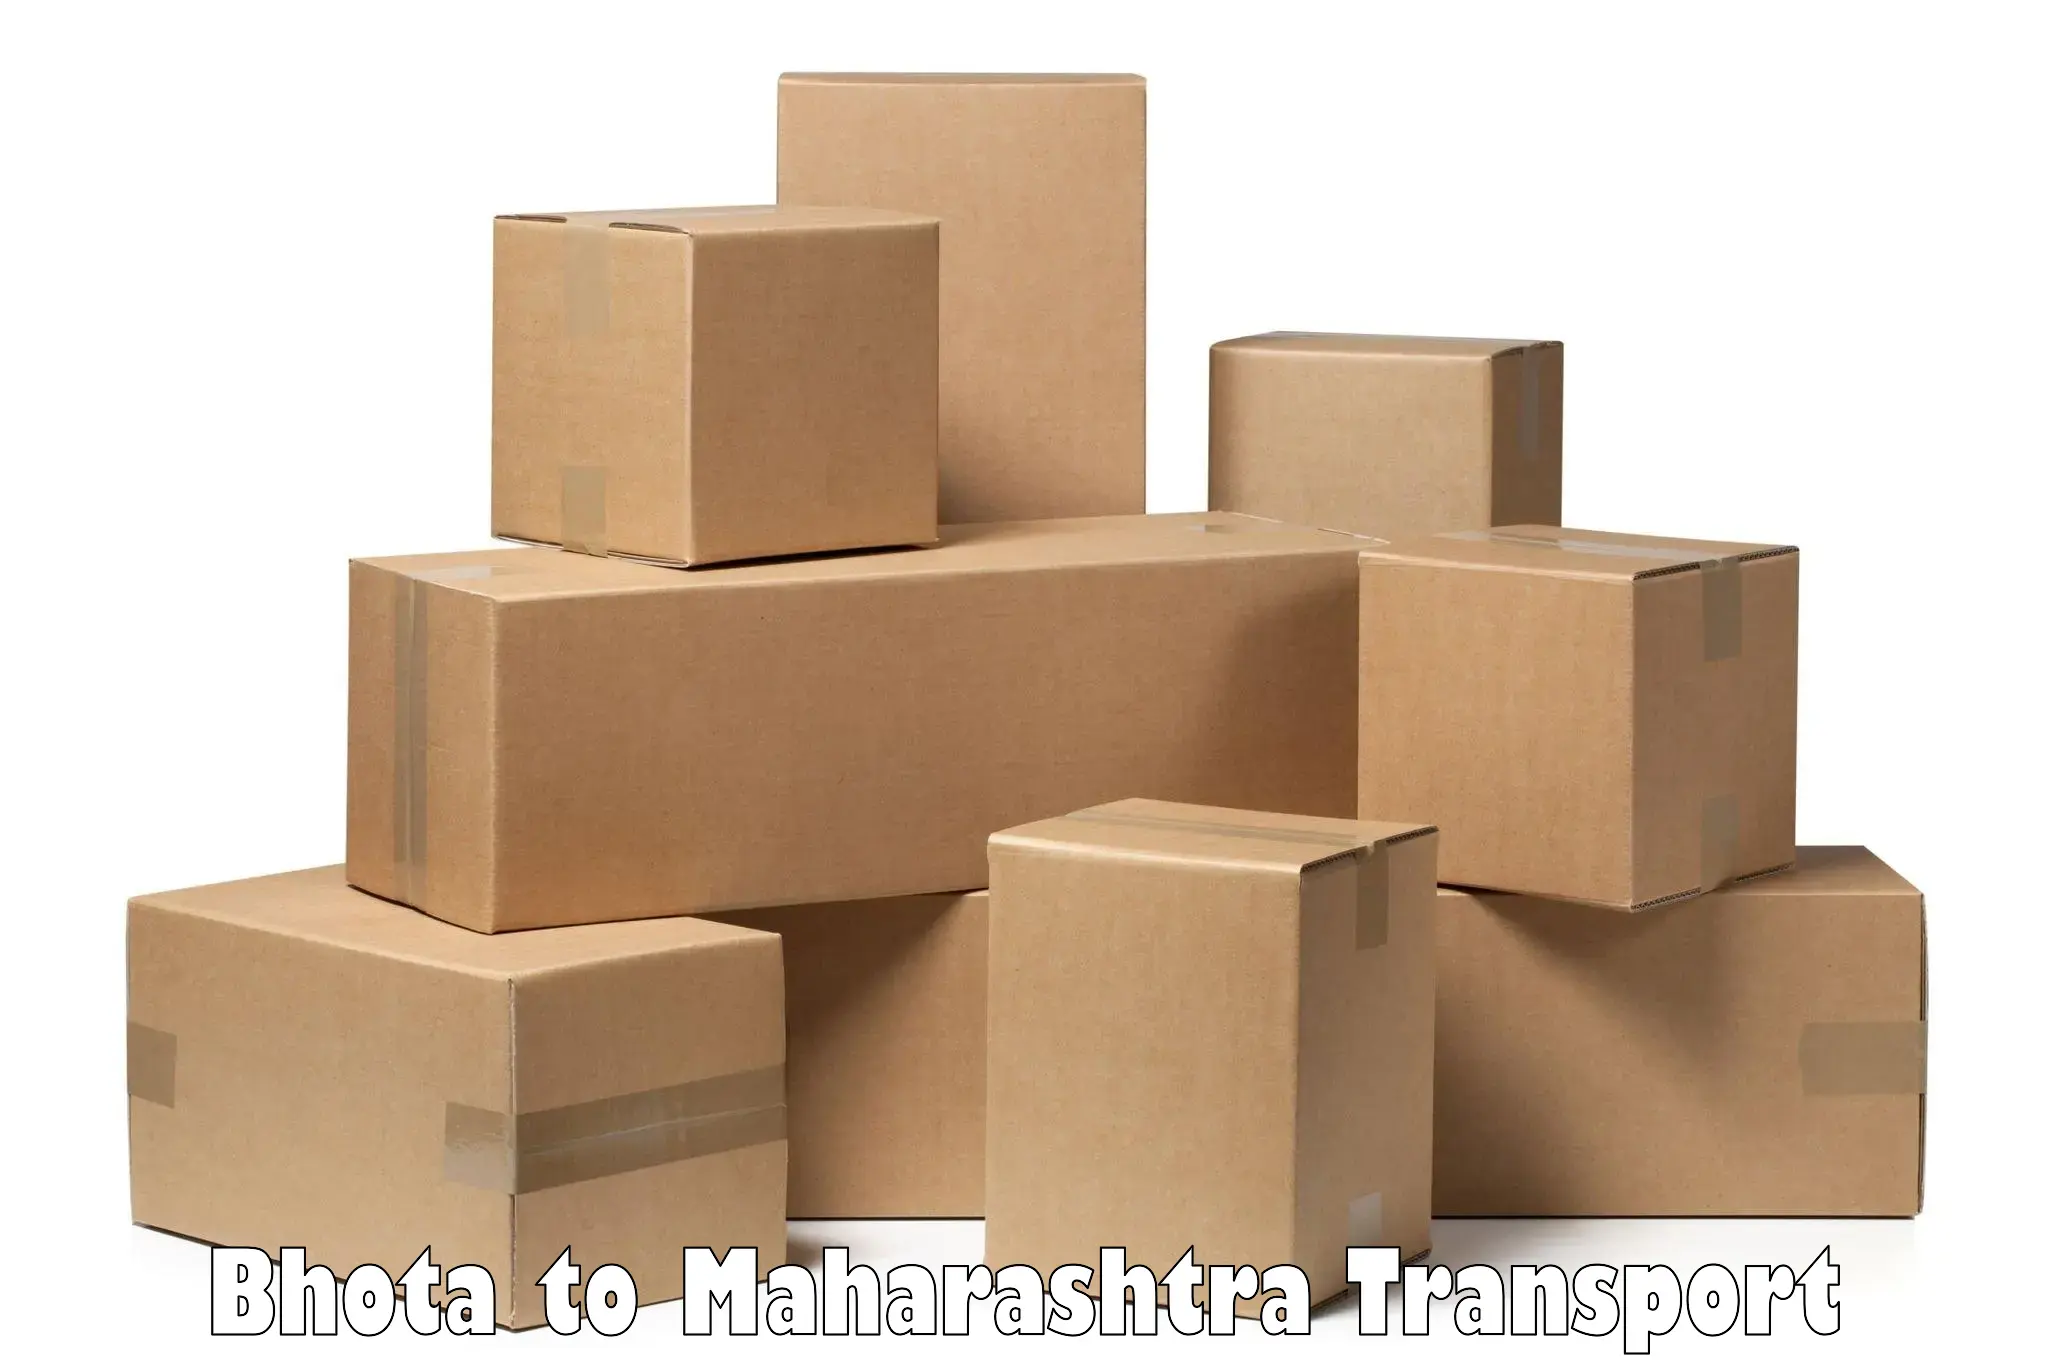 Commercial transport service Bhota to Atpadi